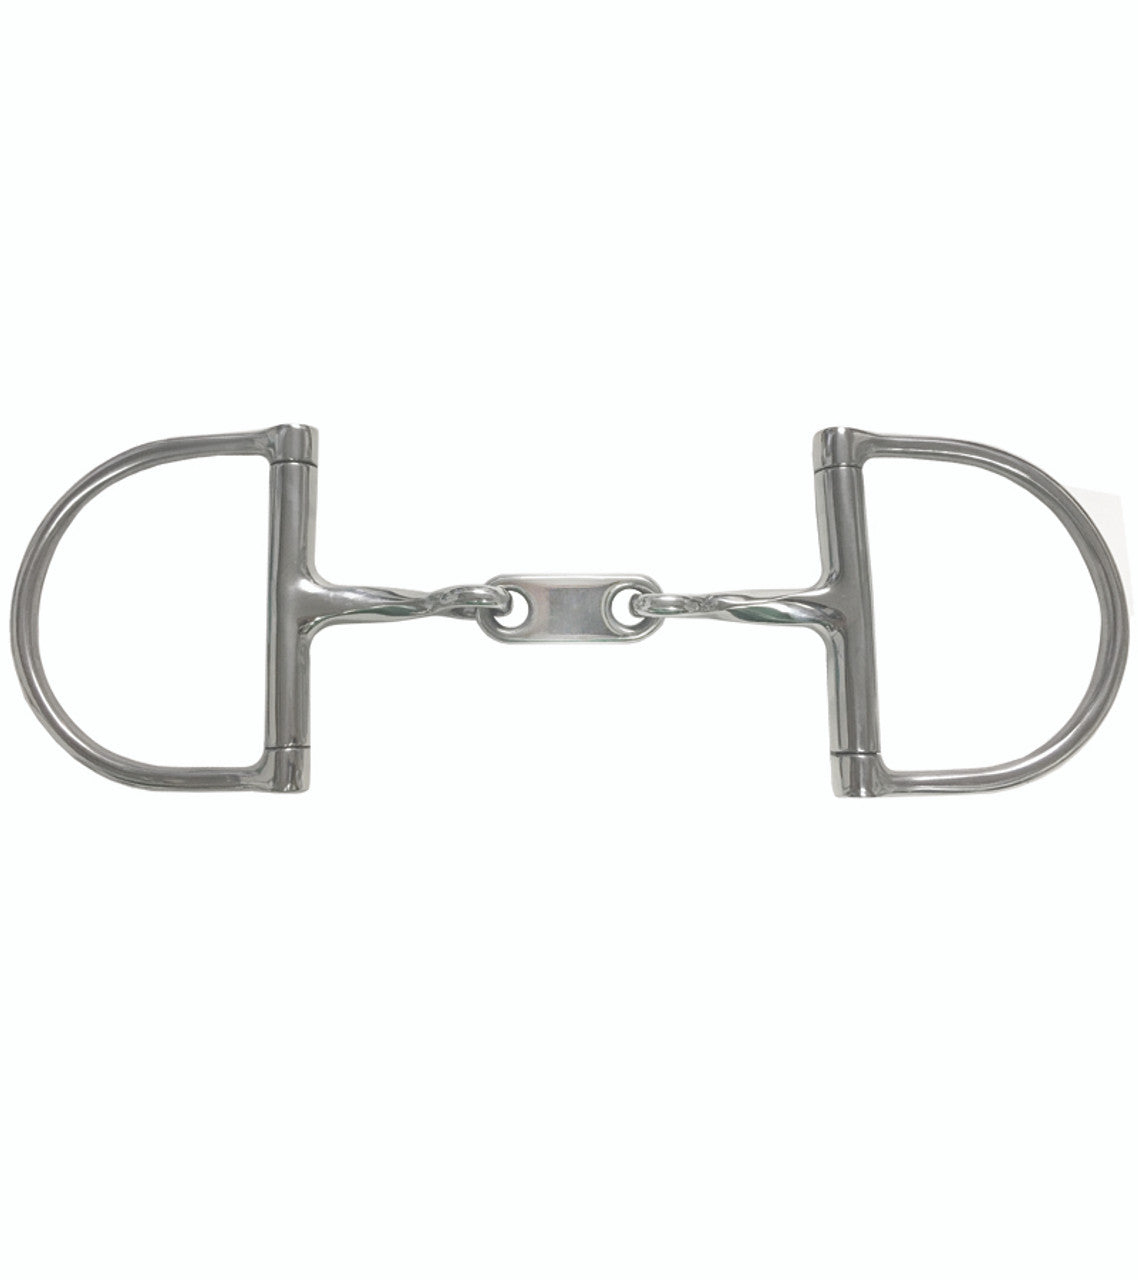 Dr. Bristol Twisted Double Jointed Dee Ring Bit-TexanSaddles.com